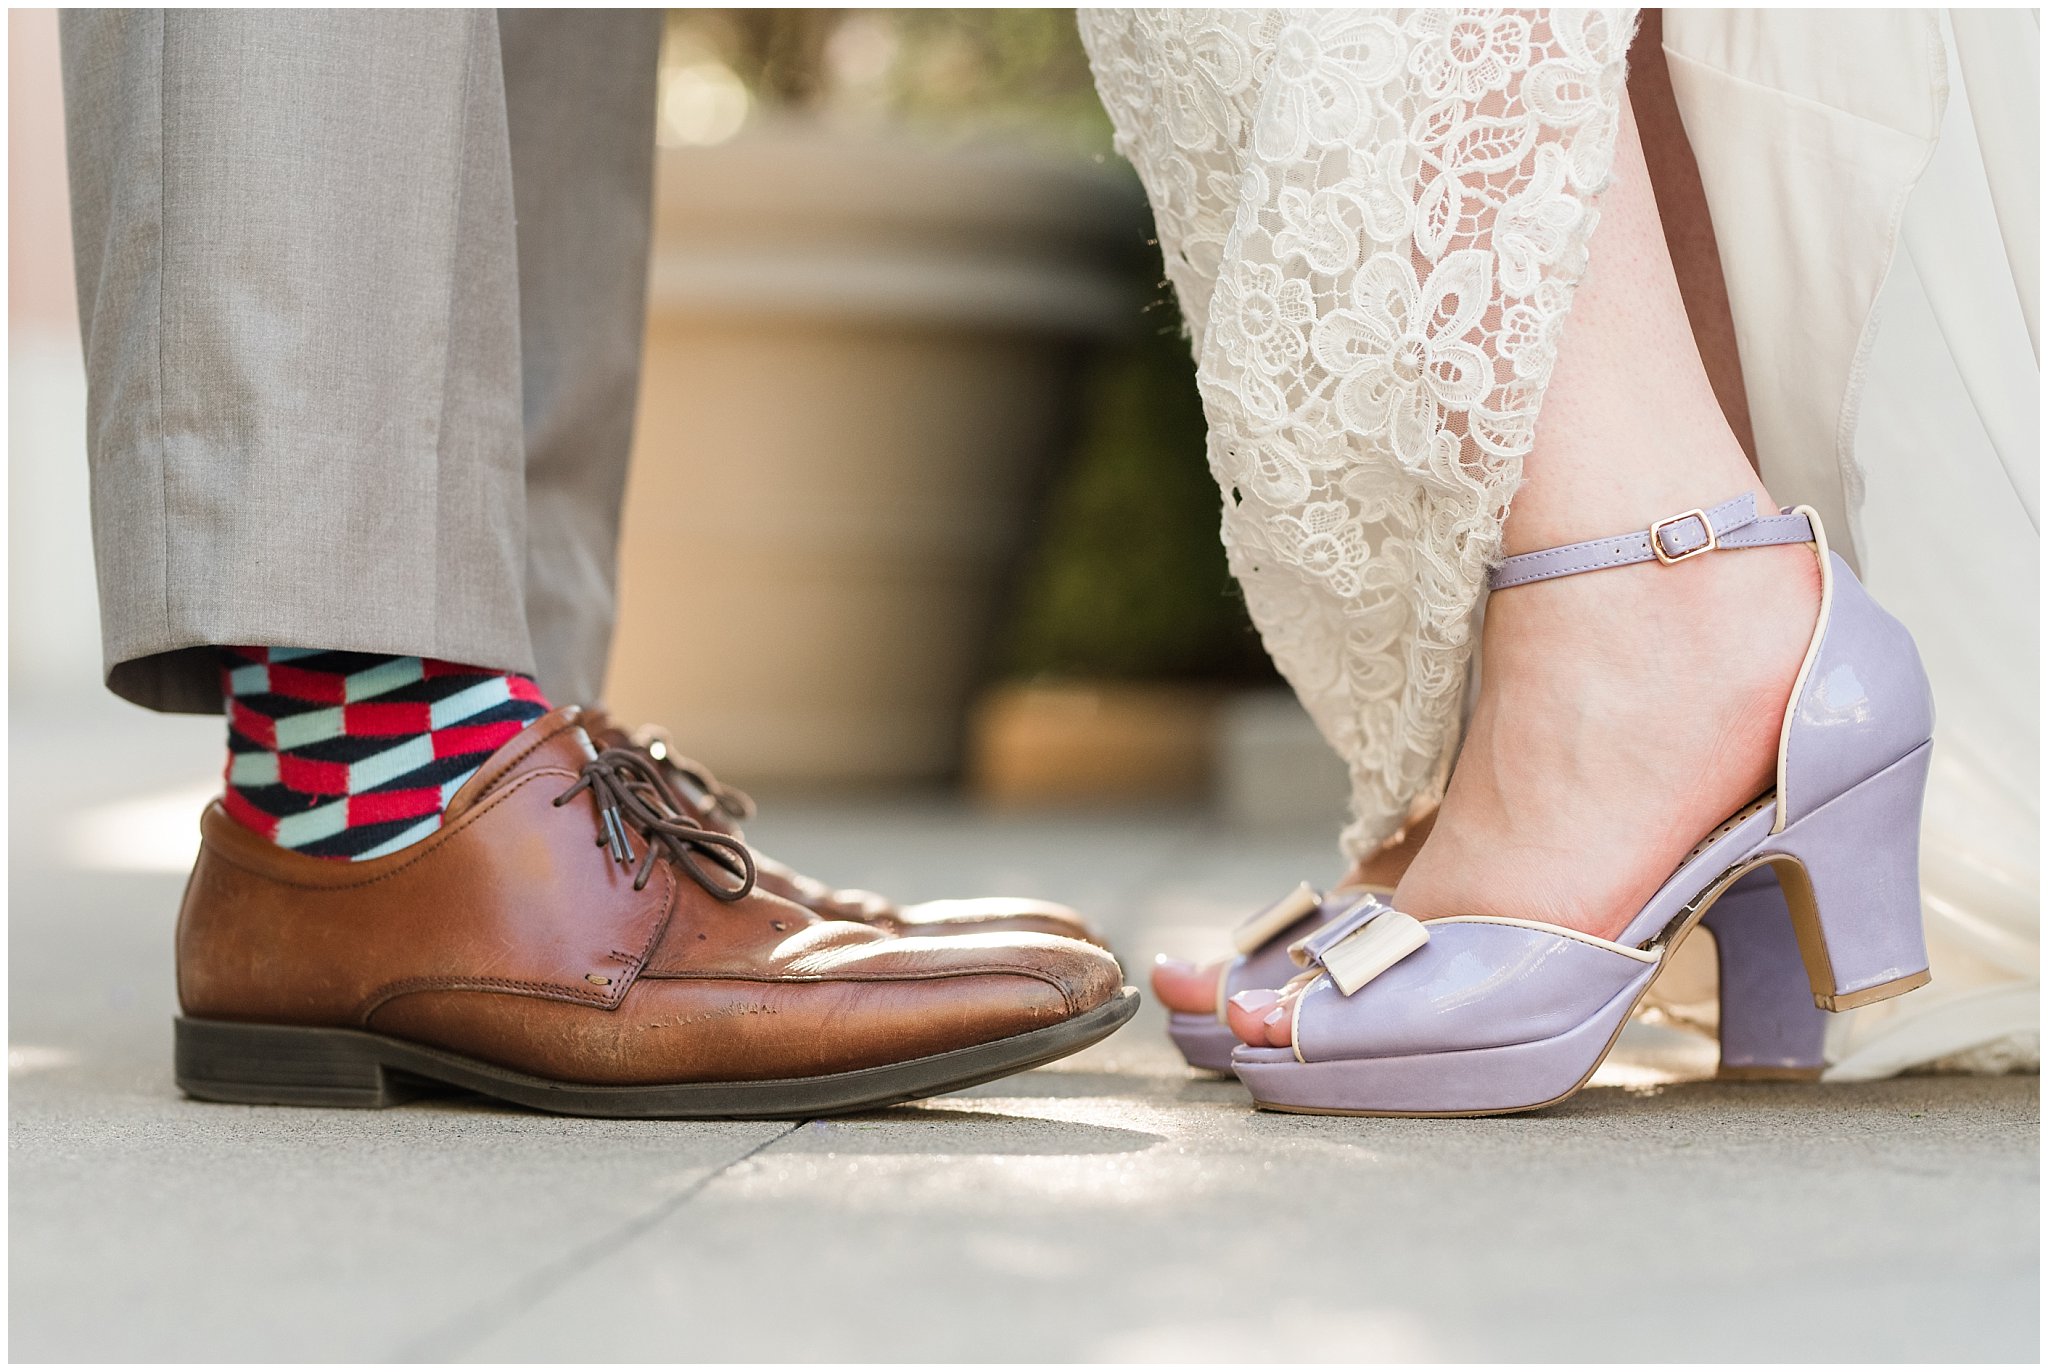 Bride and groom vintage themed wedding at Fountain View Event Venue at Farmington Station | Fountain View Event Venue and Bountiful Temple Wedding | Jessie and Dallin Photography